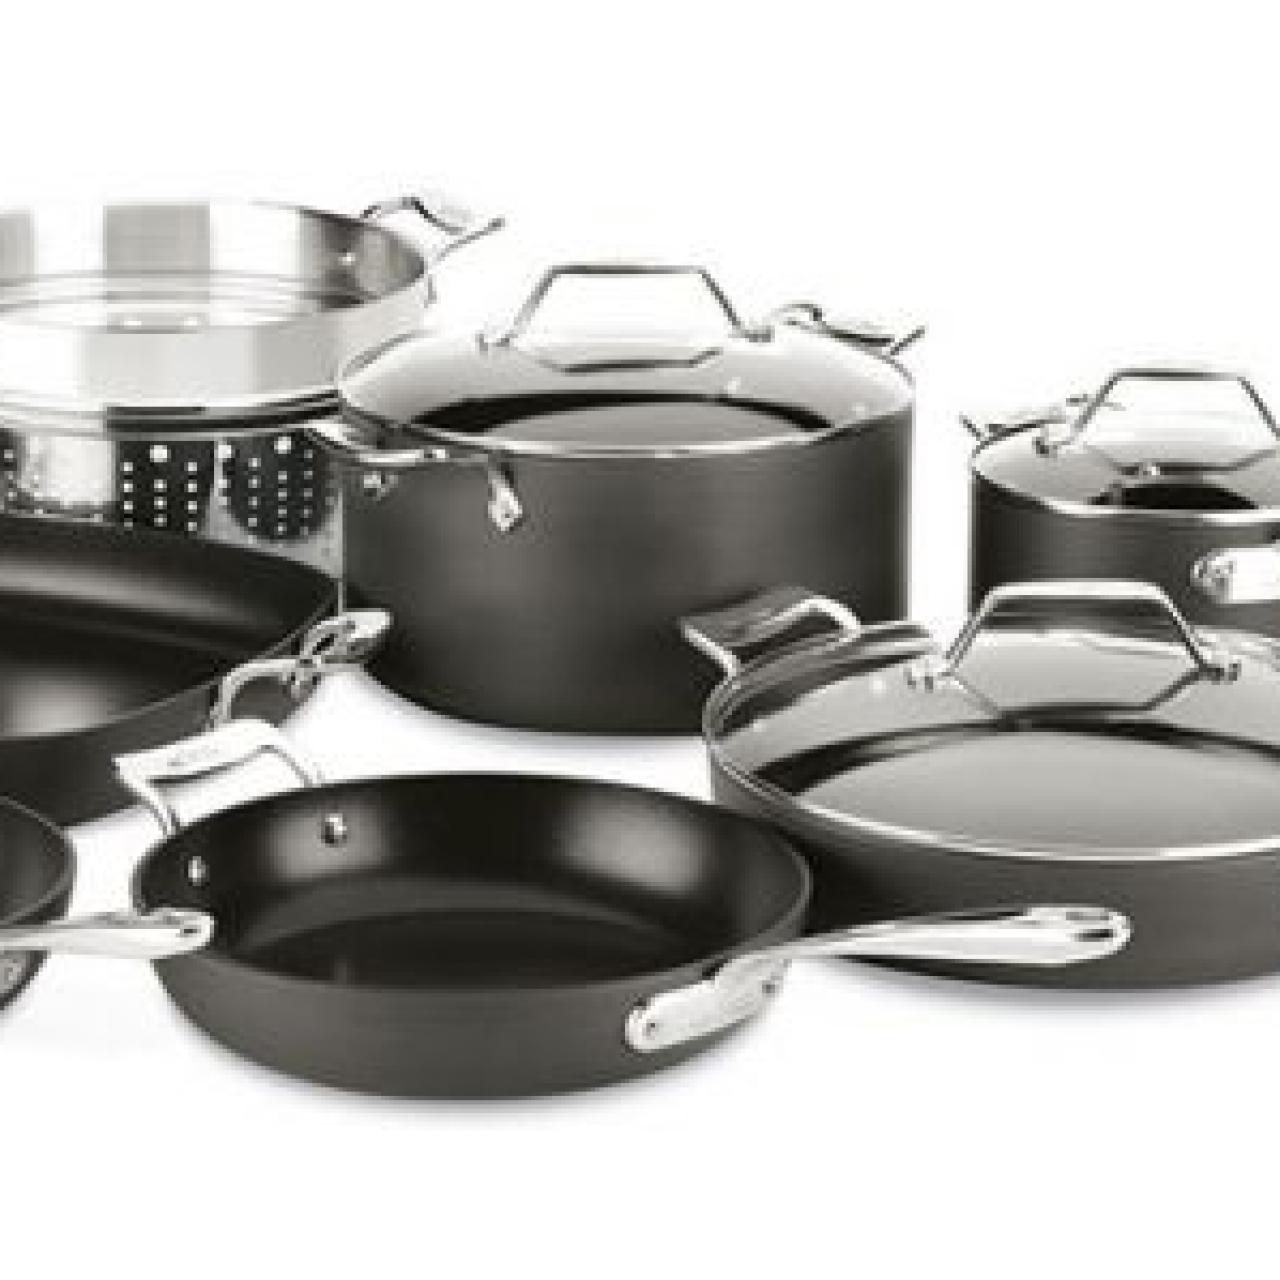 https://food.fnr.sndimg.com/content/dam/images/food/products/2021/9/20/rx_12-piece-hard-anodized-cookware-set-.jpeg.rend.hgtvcom.1280.1280.suffix/1632164642874.jpeg